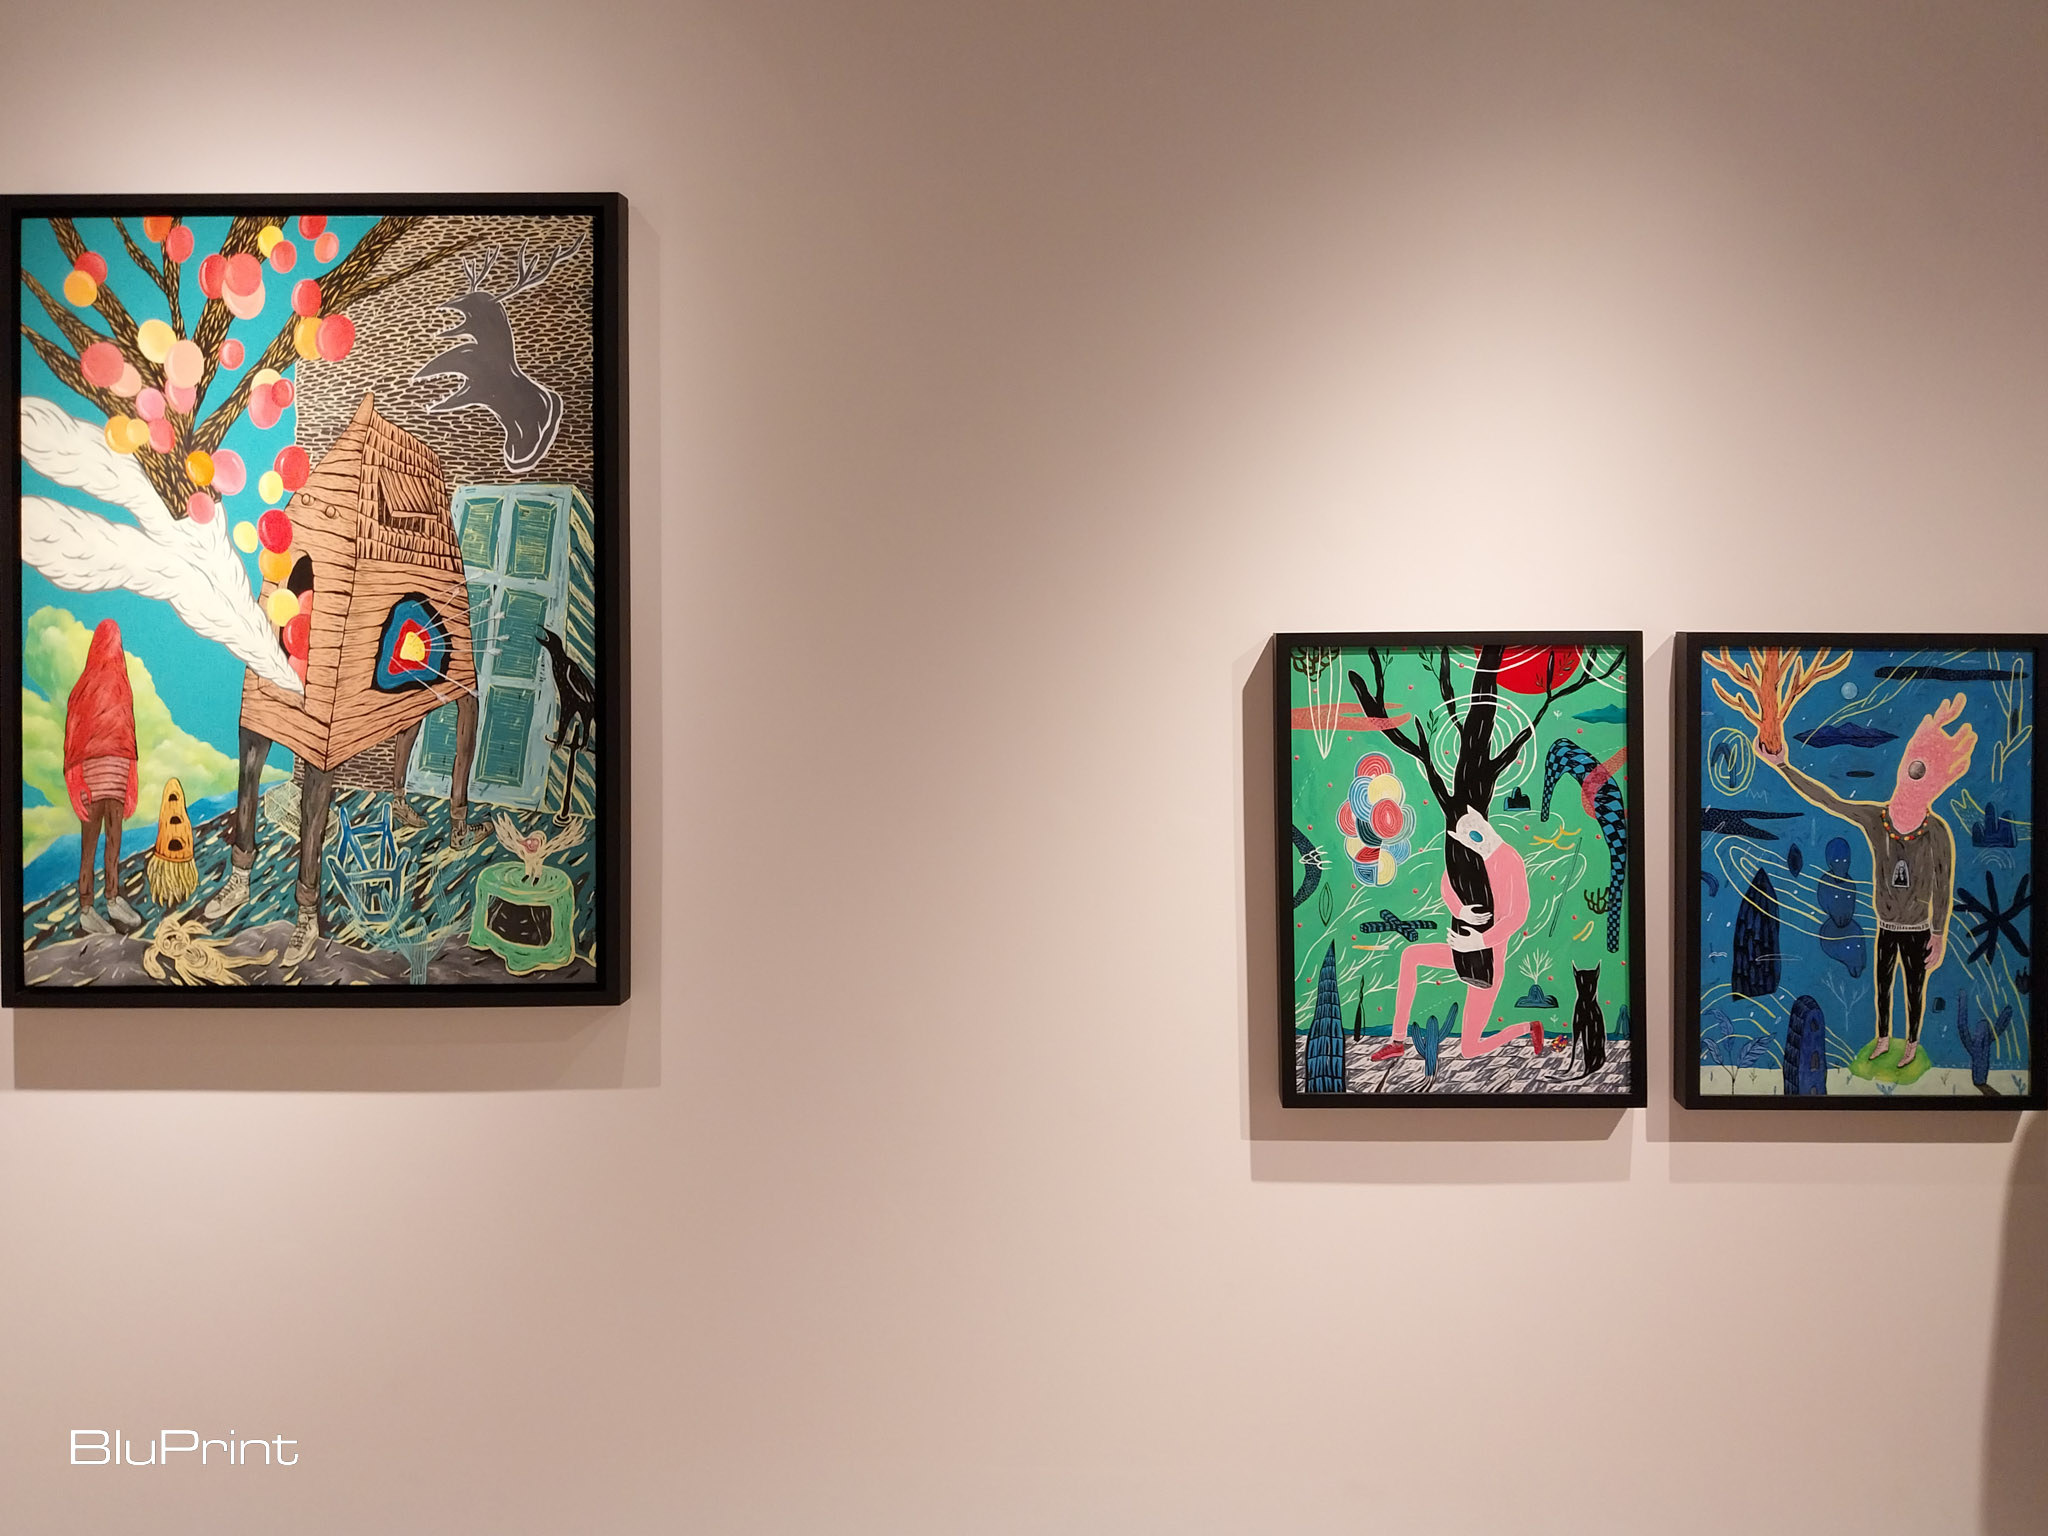 Three paintings from Imam Santoso's "Solitude" exhibit in Galerie Stephanie. Photo by Elle Yap.